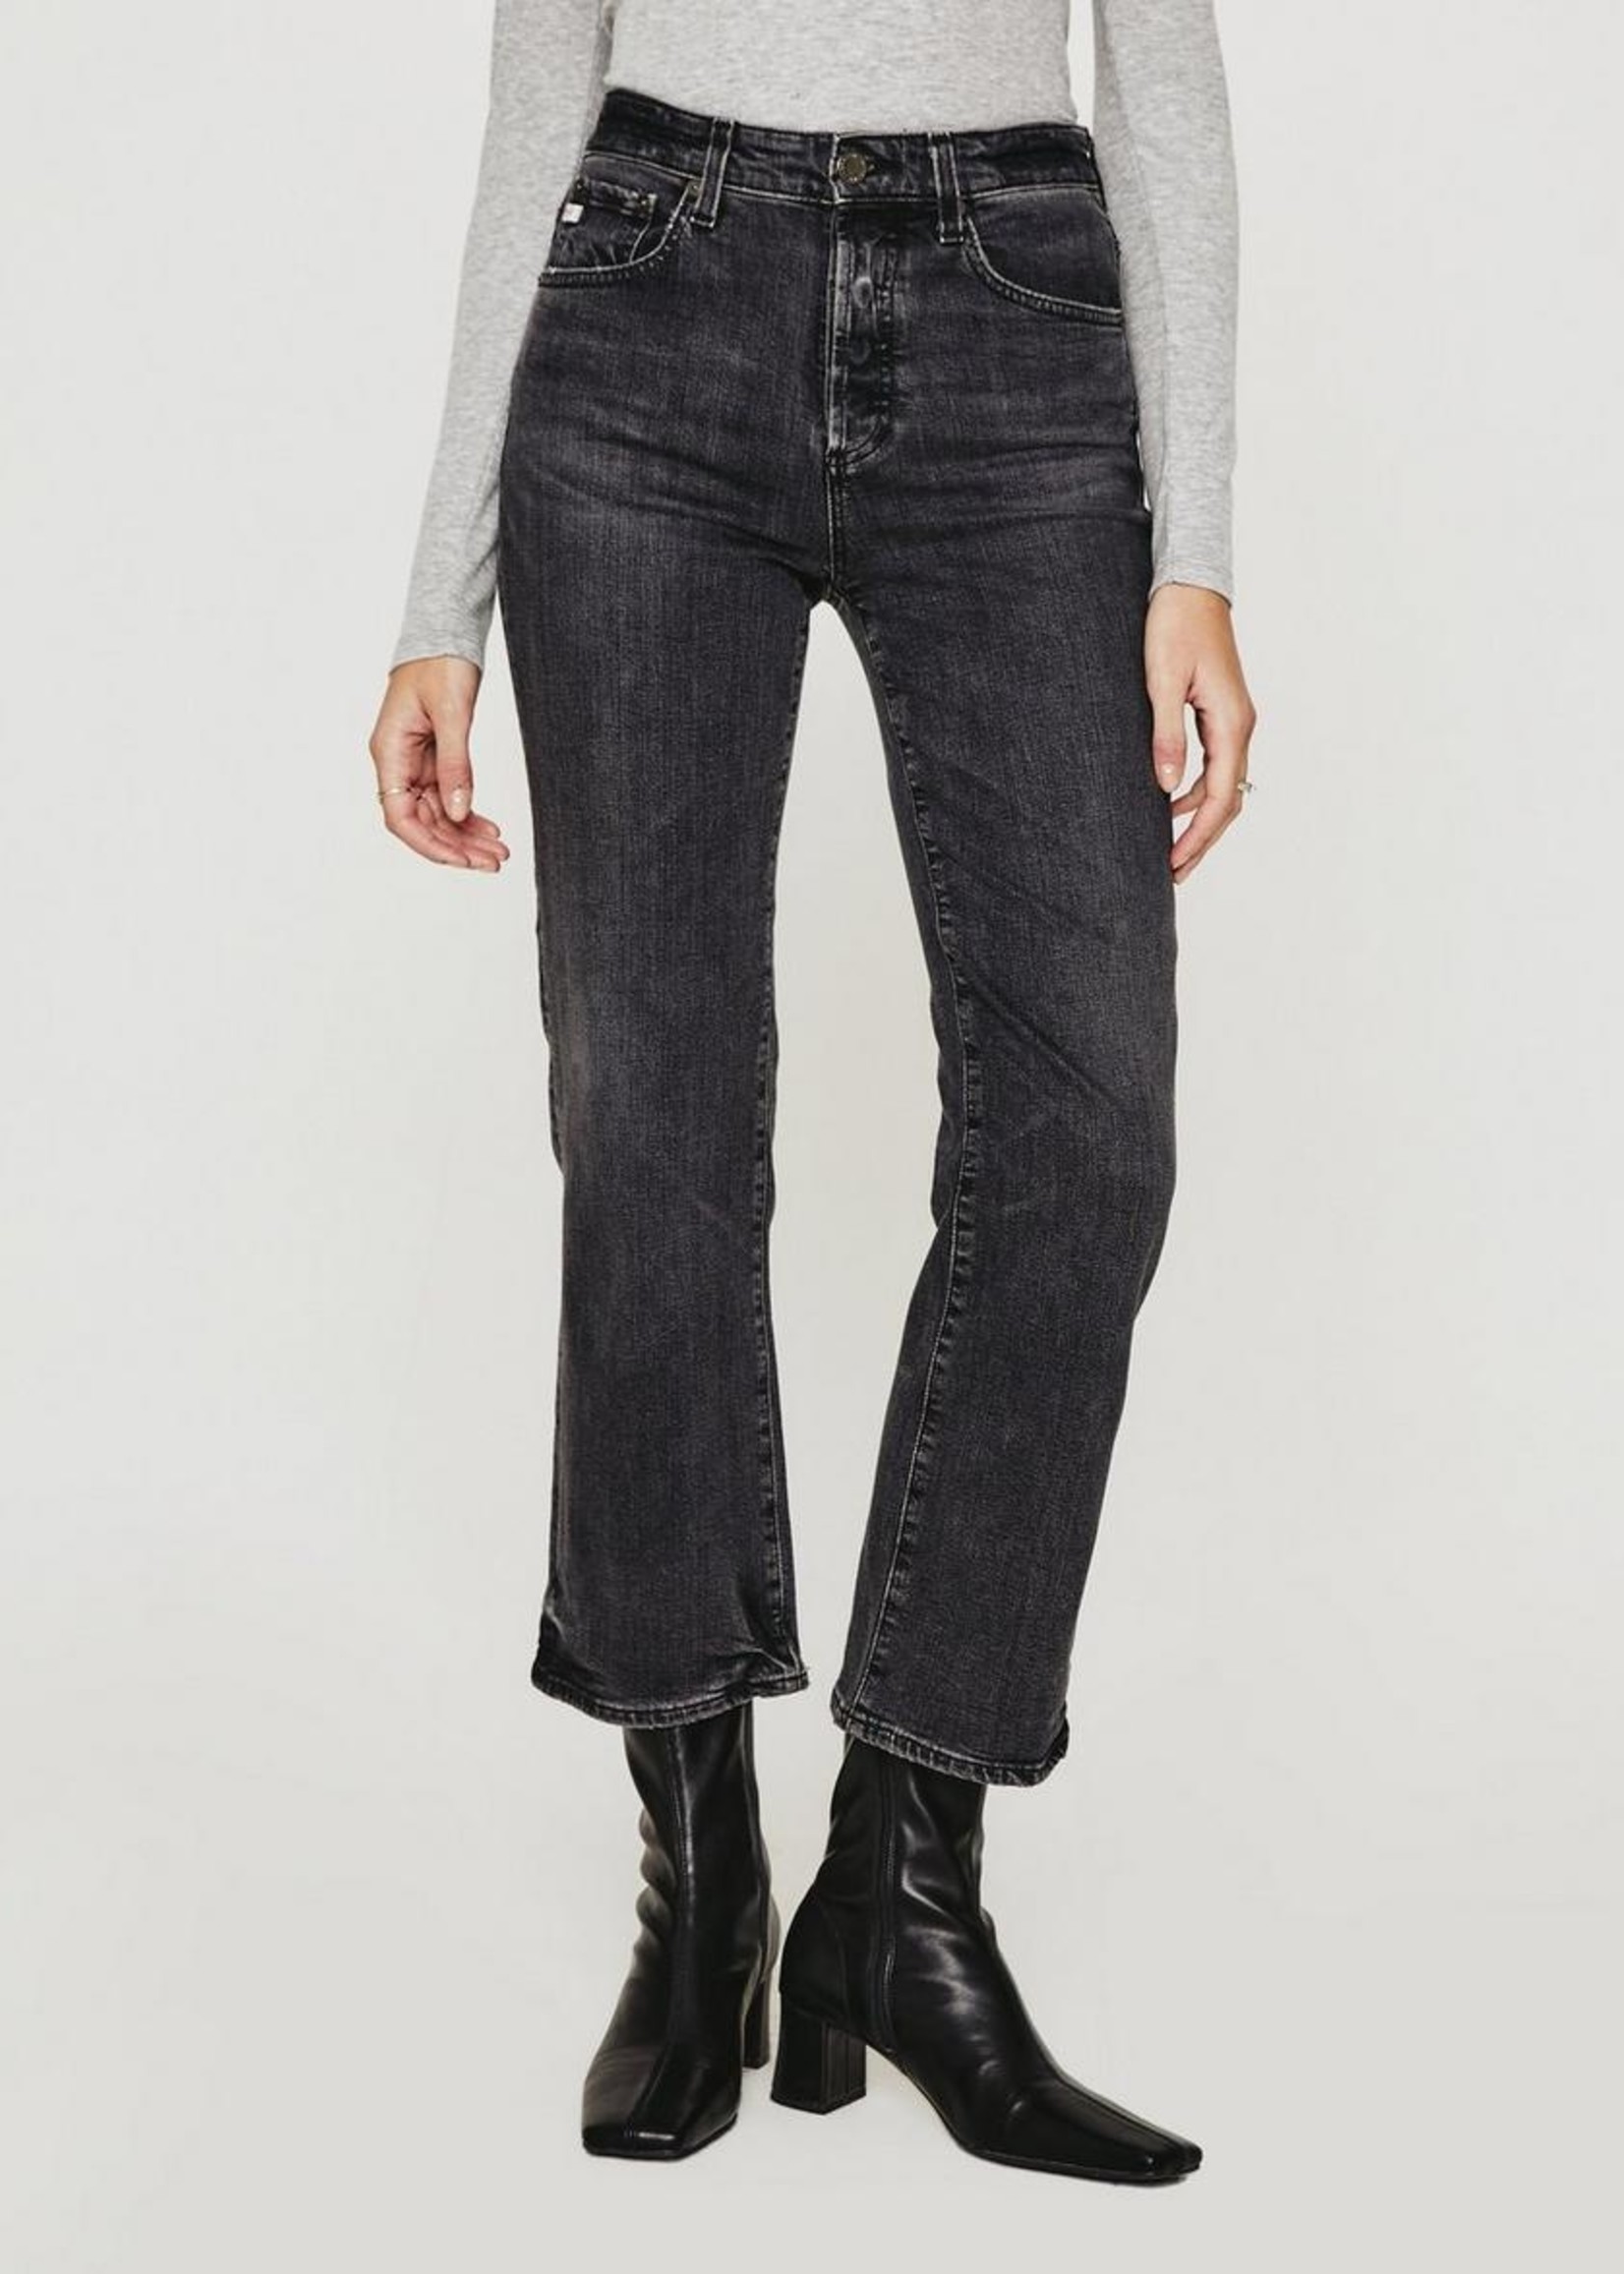 AG JEANS KINSLEY - STS1COS10YBOF -